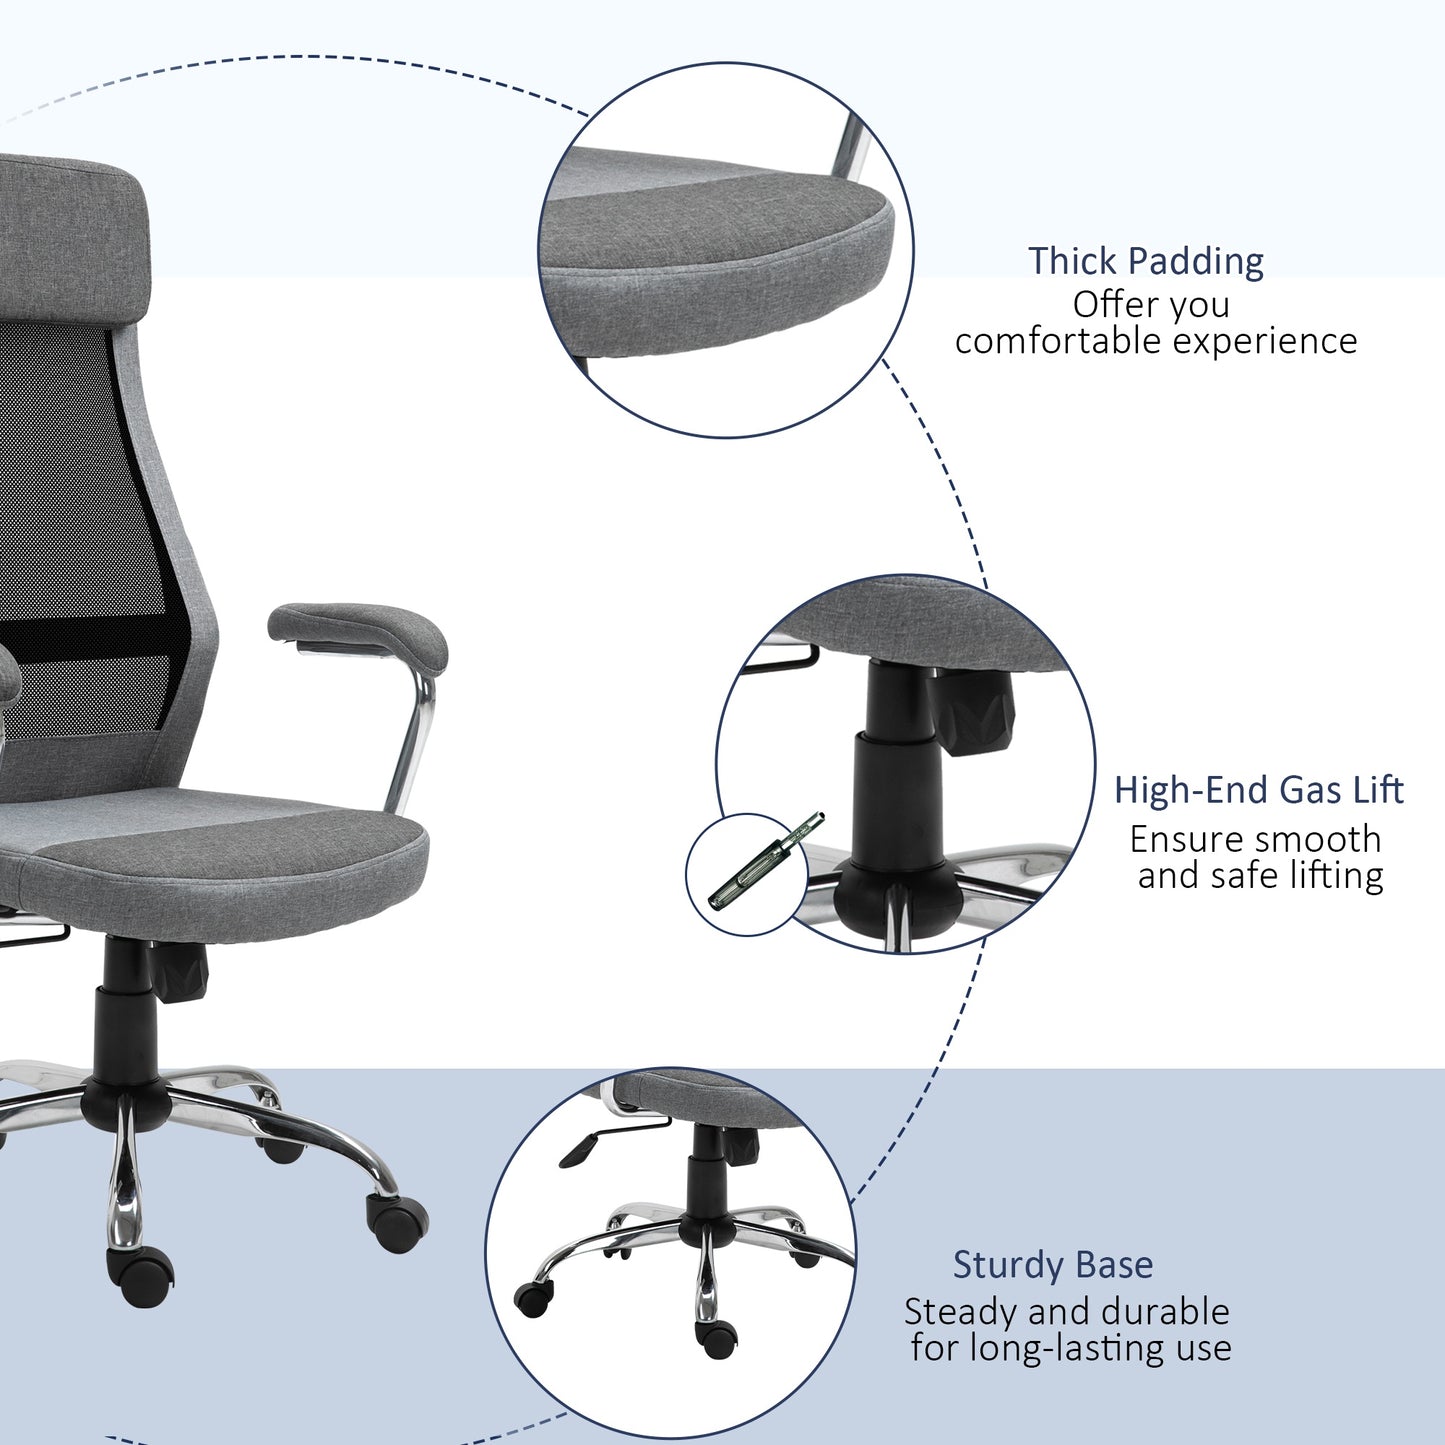 Vinsetto Office Chair Mesh High Back Swivel Task PC Desk Chair for Home w/ Arm, Grey